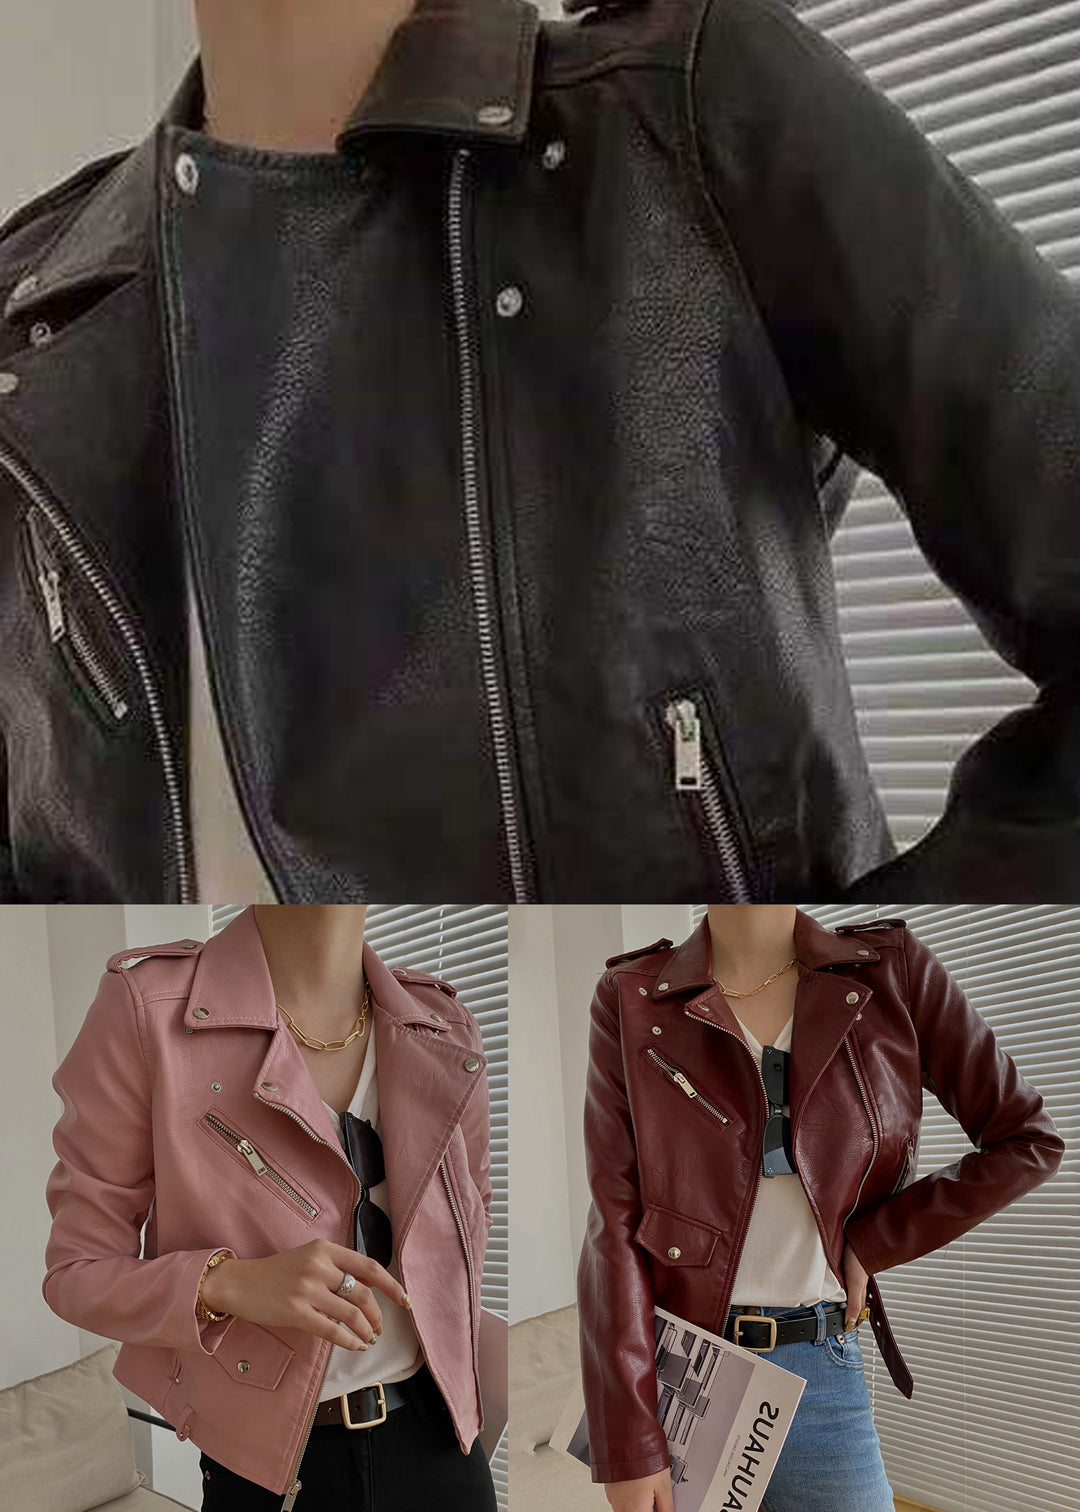 Art Pink Zip Up Pockets Patchwork Faux Leather Jacket Fall